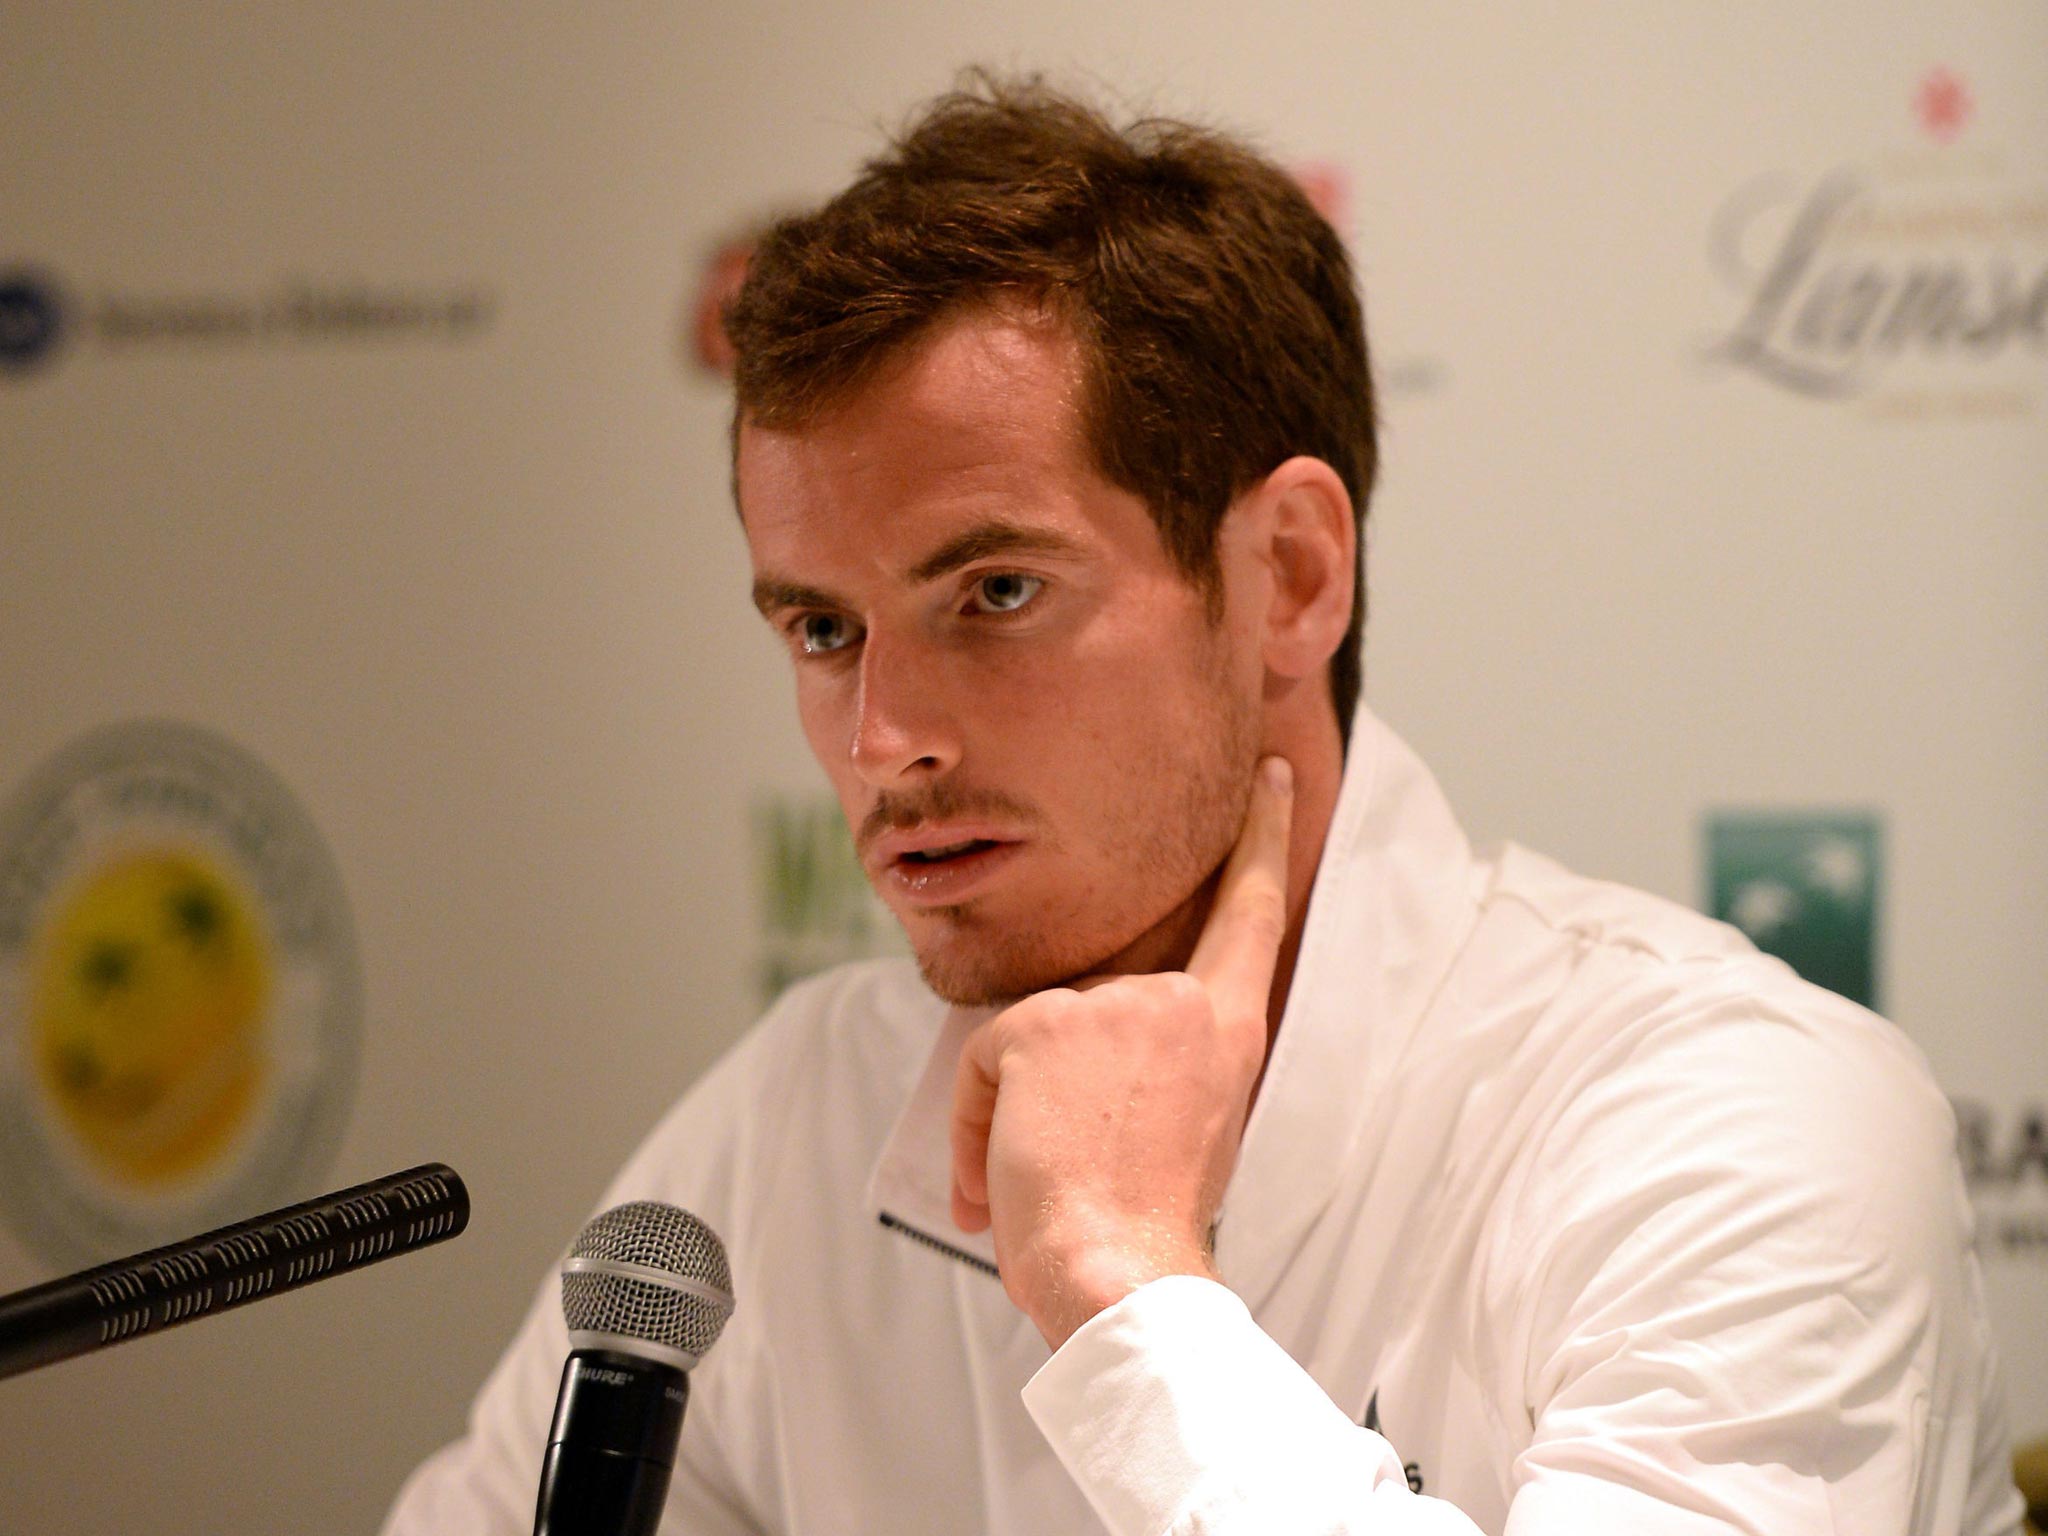 Champion Andy Murray says he is calm, focused and ready